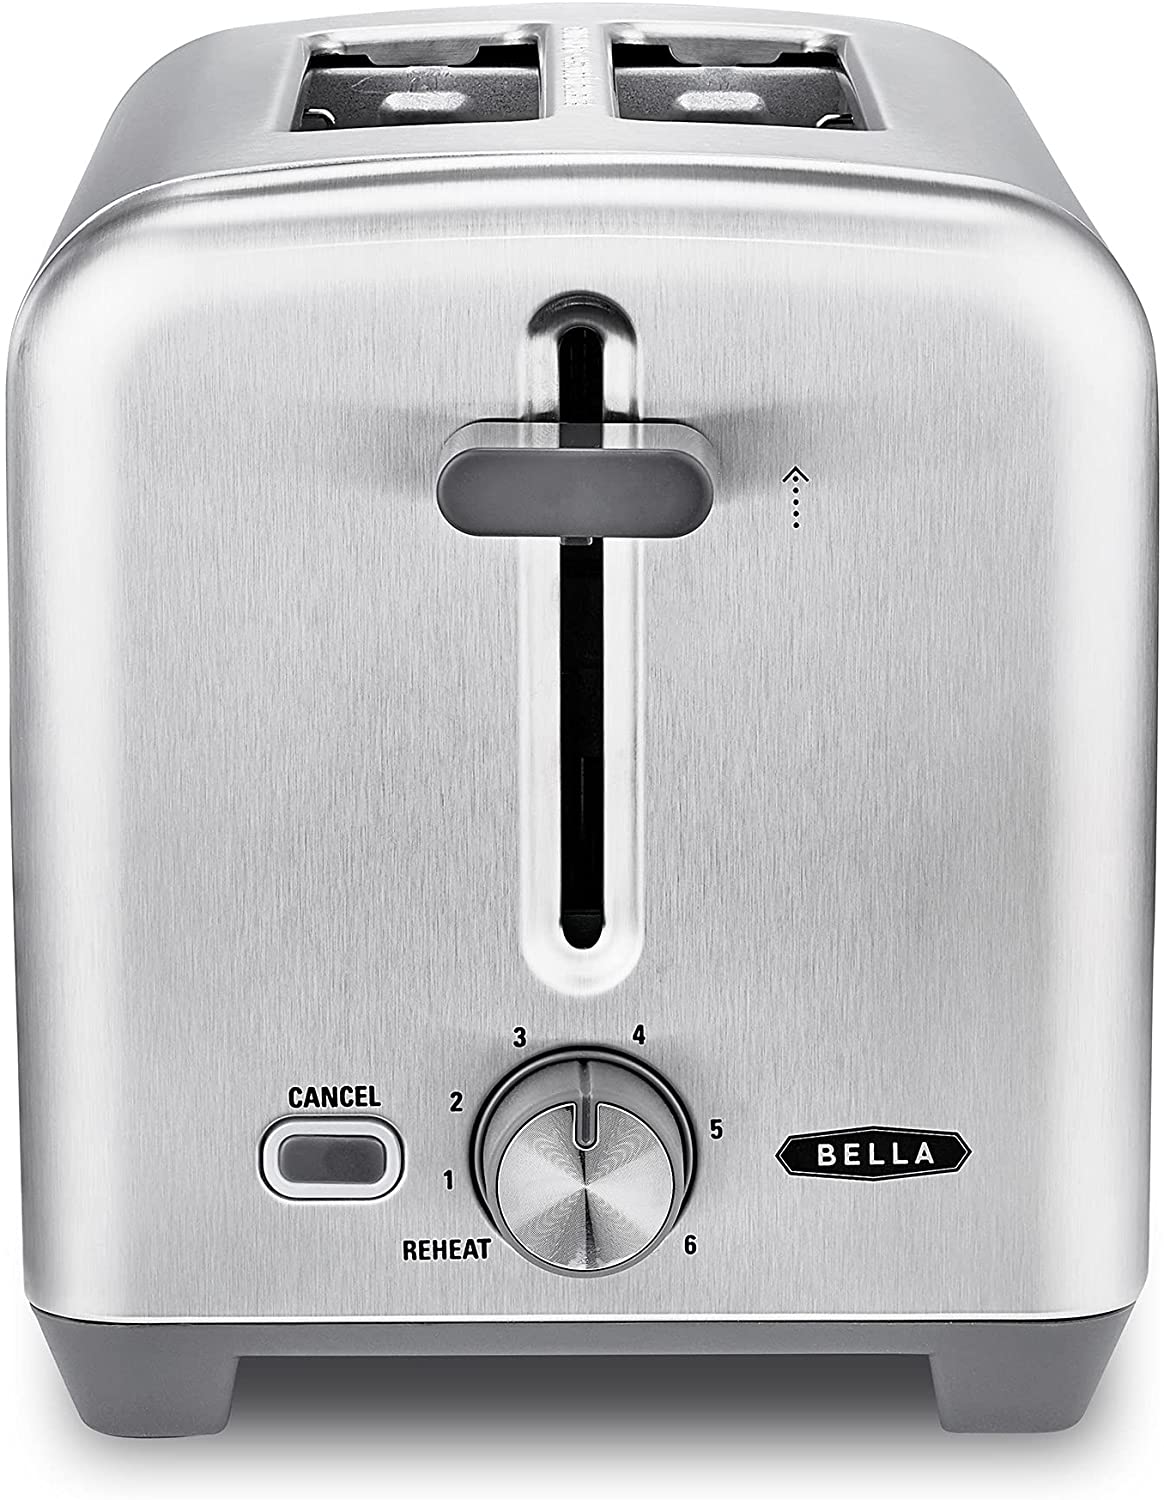 Krups Savoy Toaster #KH3110 Review, Price and Features - Pros and Cons of  Krups Savoy #KH3110